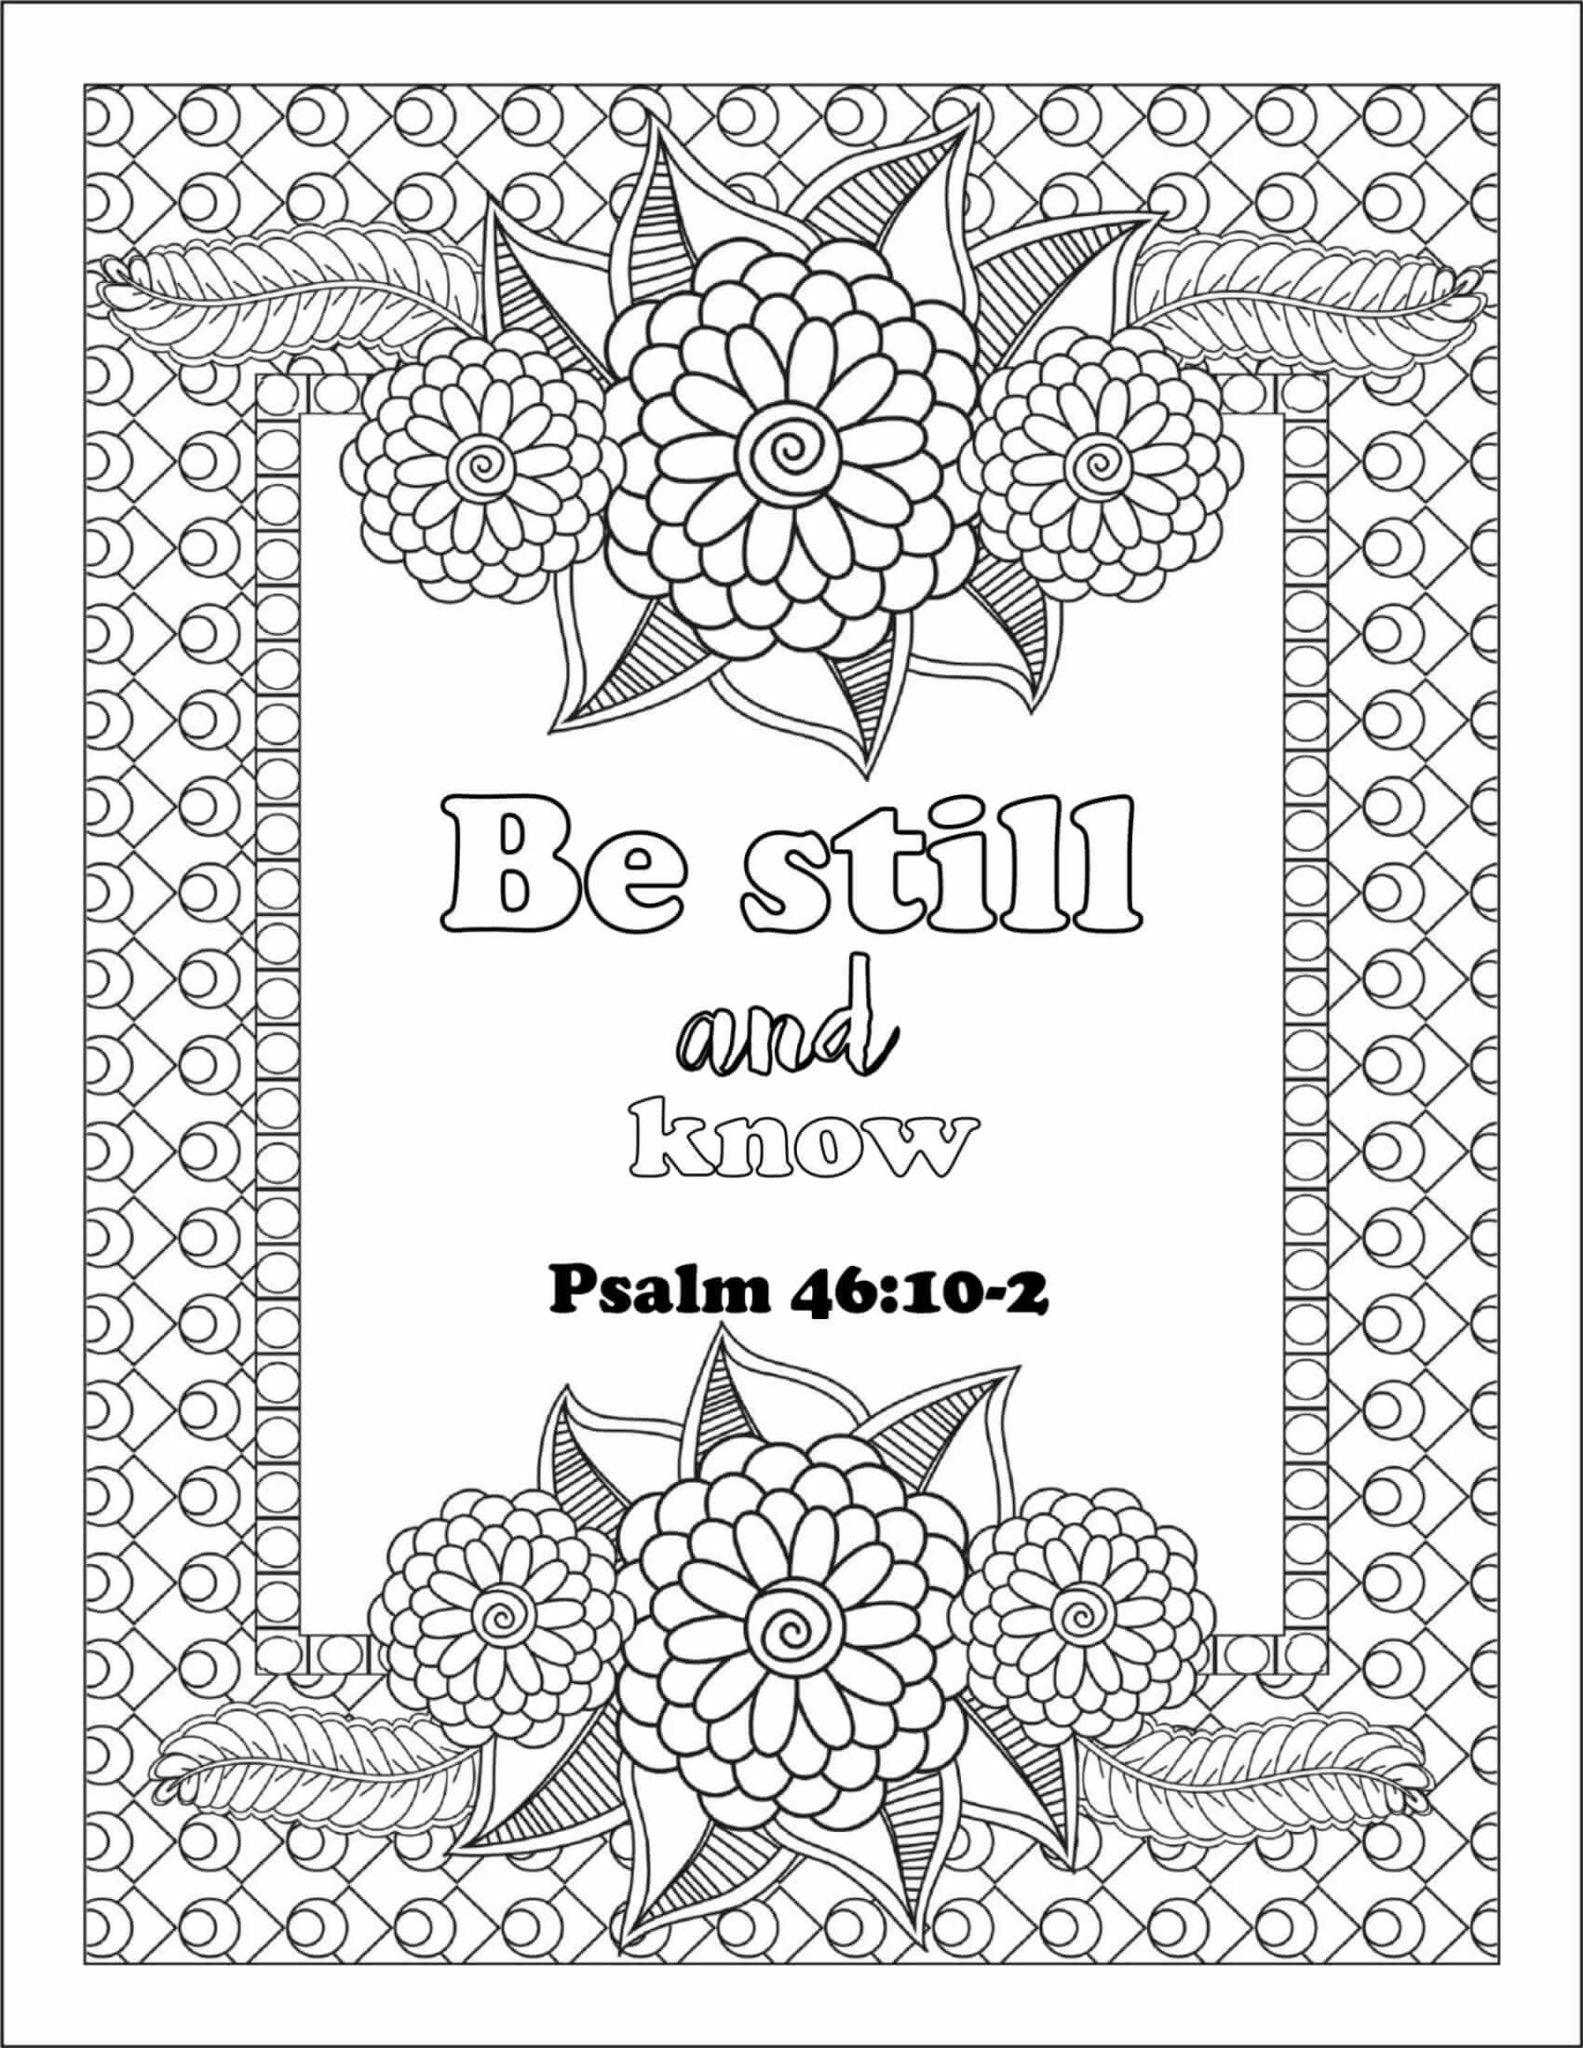 Bible Verse Digital Coloring Book 40 Pages - Best before food